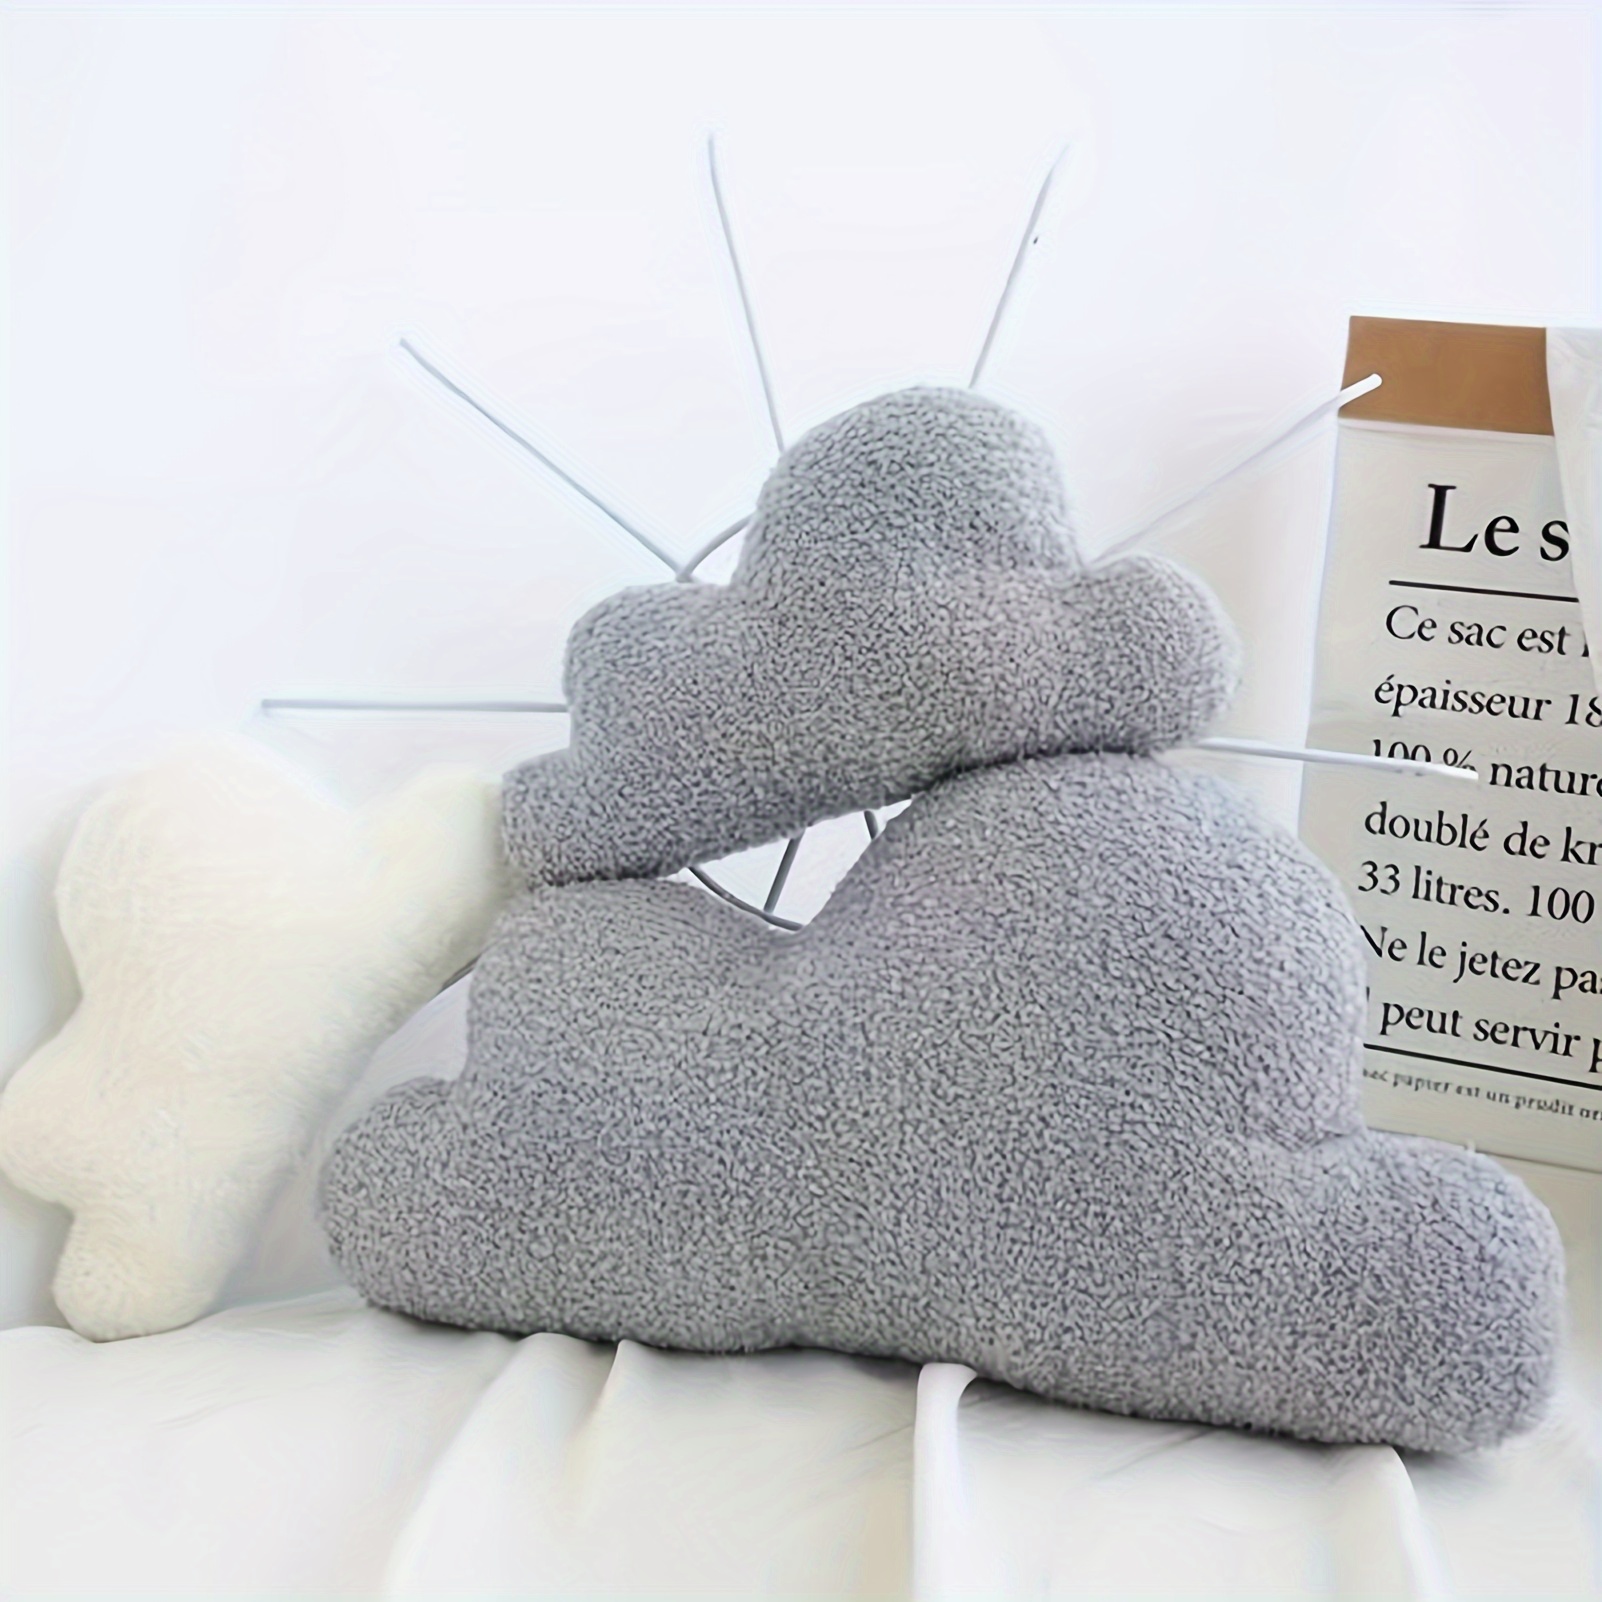 

1pc Soft And Cozy Cloud-shaped Pillow Soft Car Plush Dolls Creative Gift Cushion For Office Chair Living Sofa Couch Bed Room Home Decor